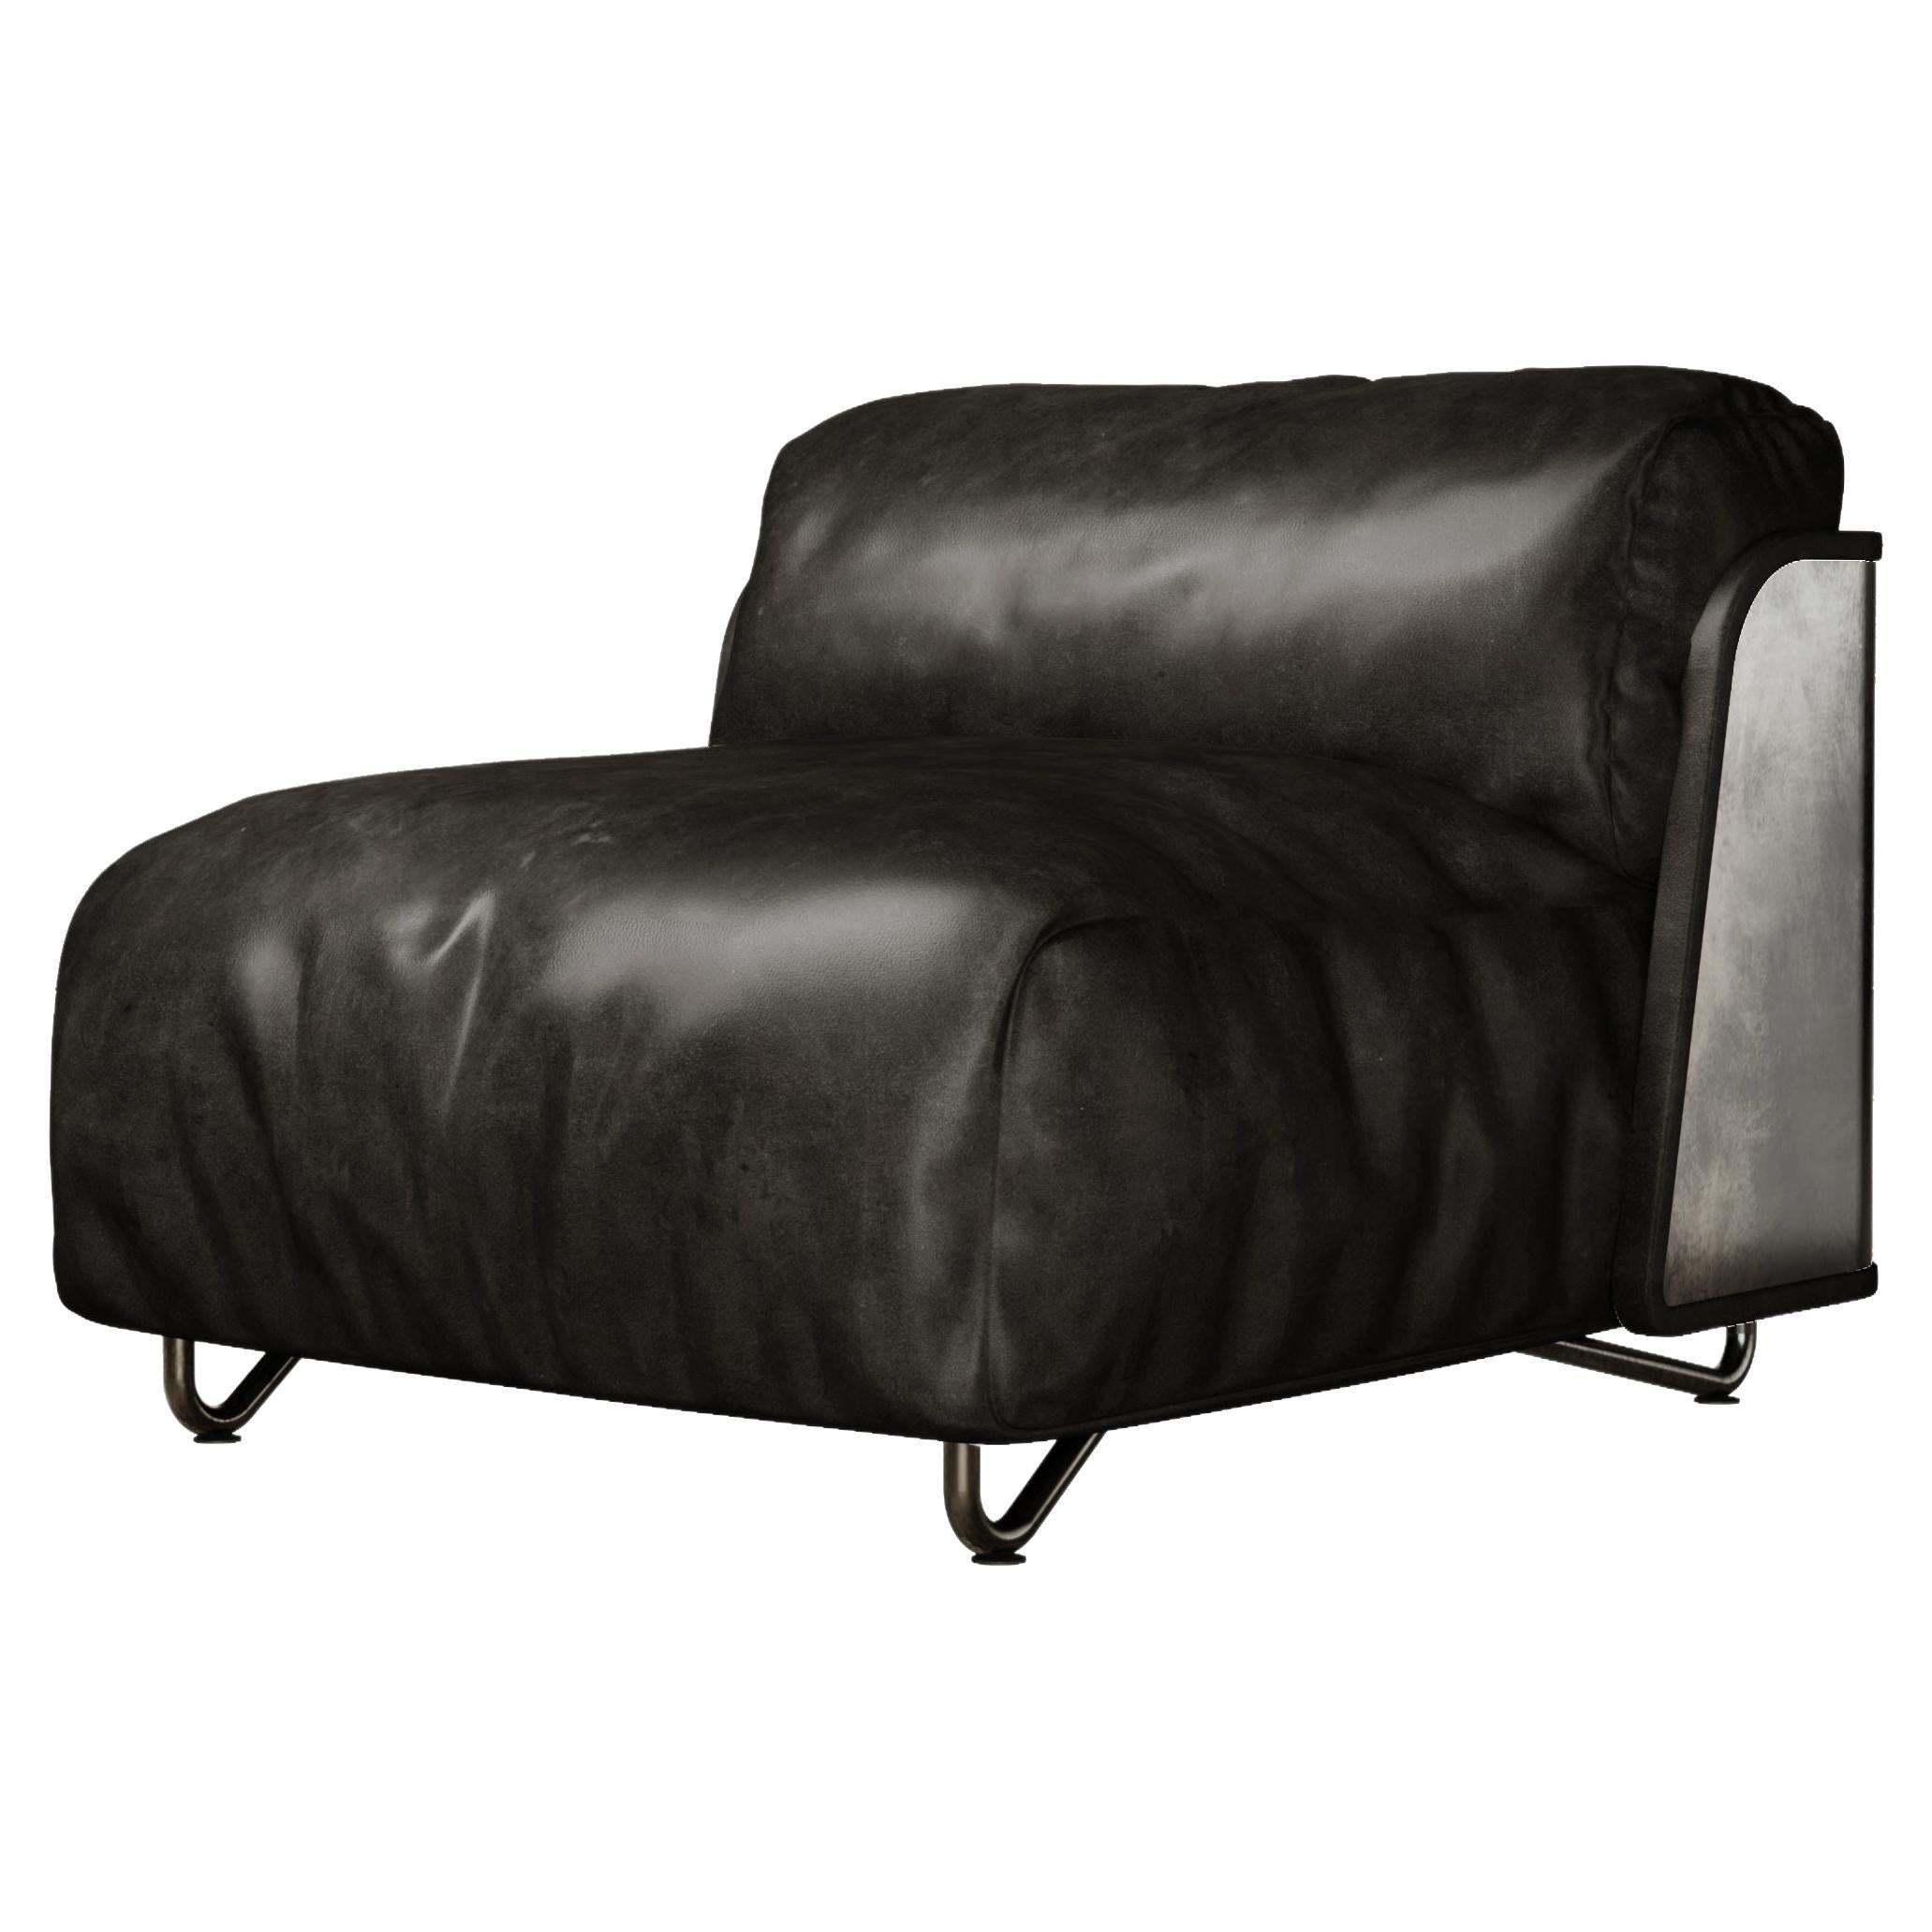 Saint-German Armchair in Black Timeless Leather and Raw Silver